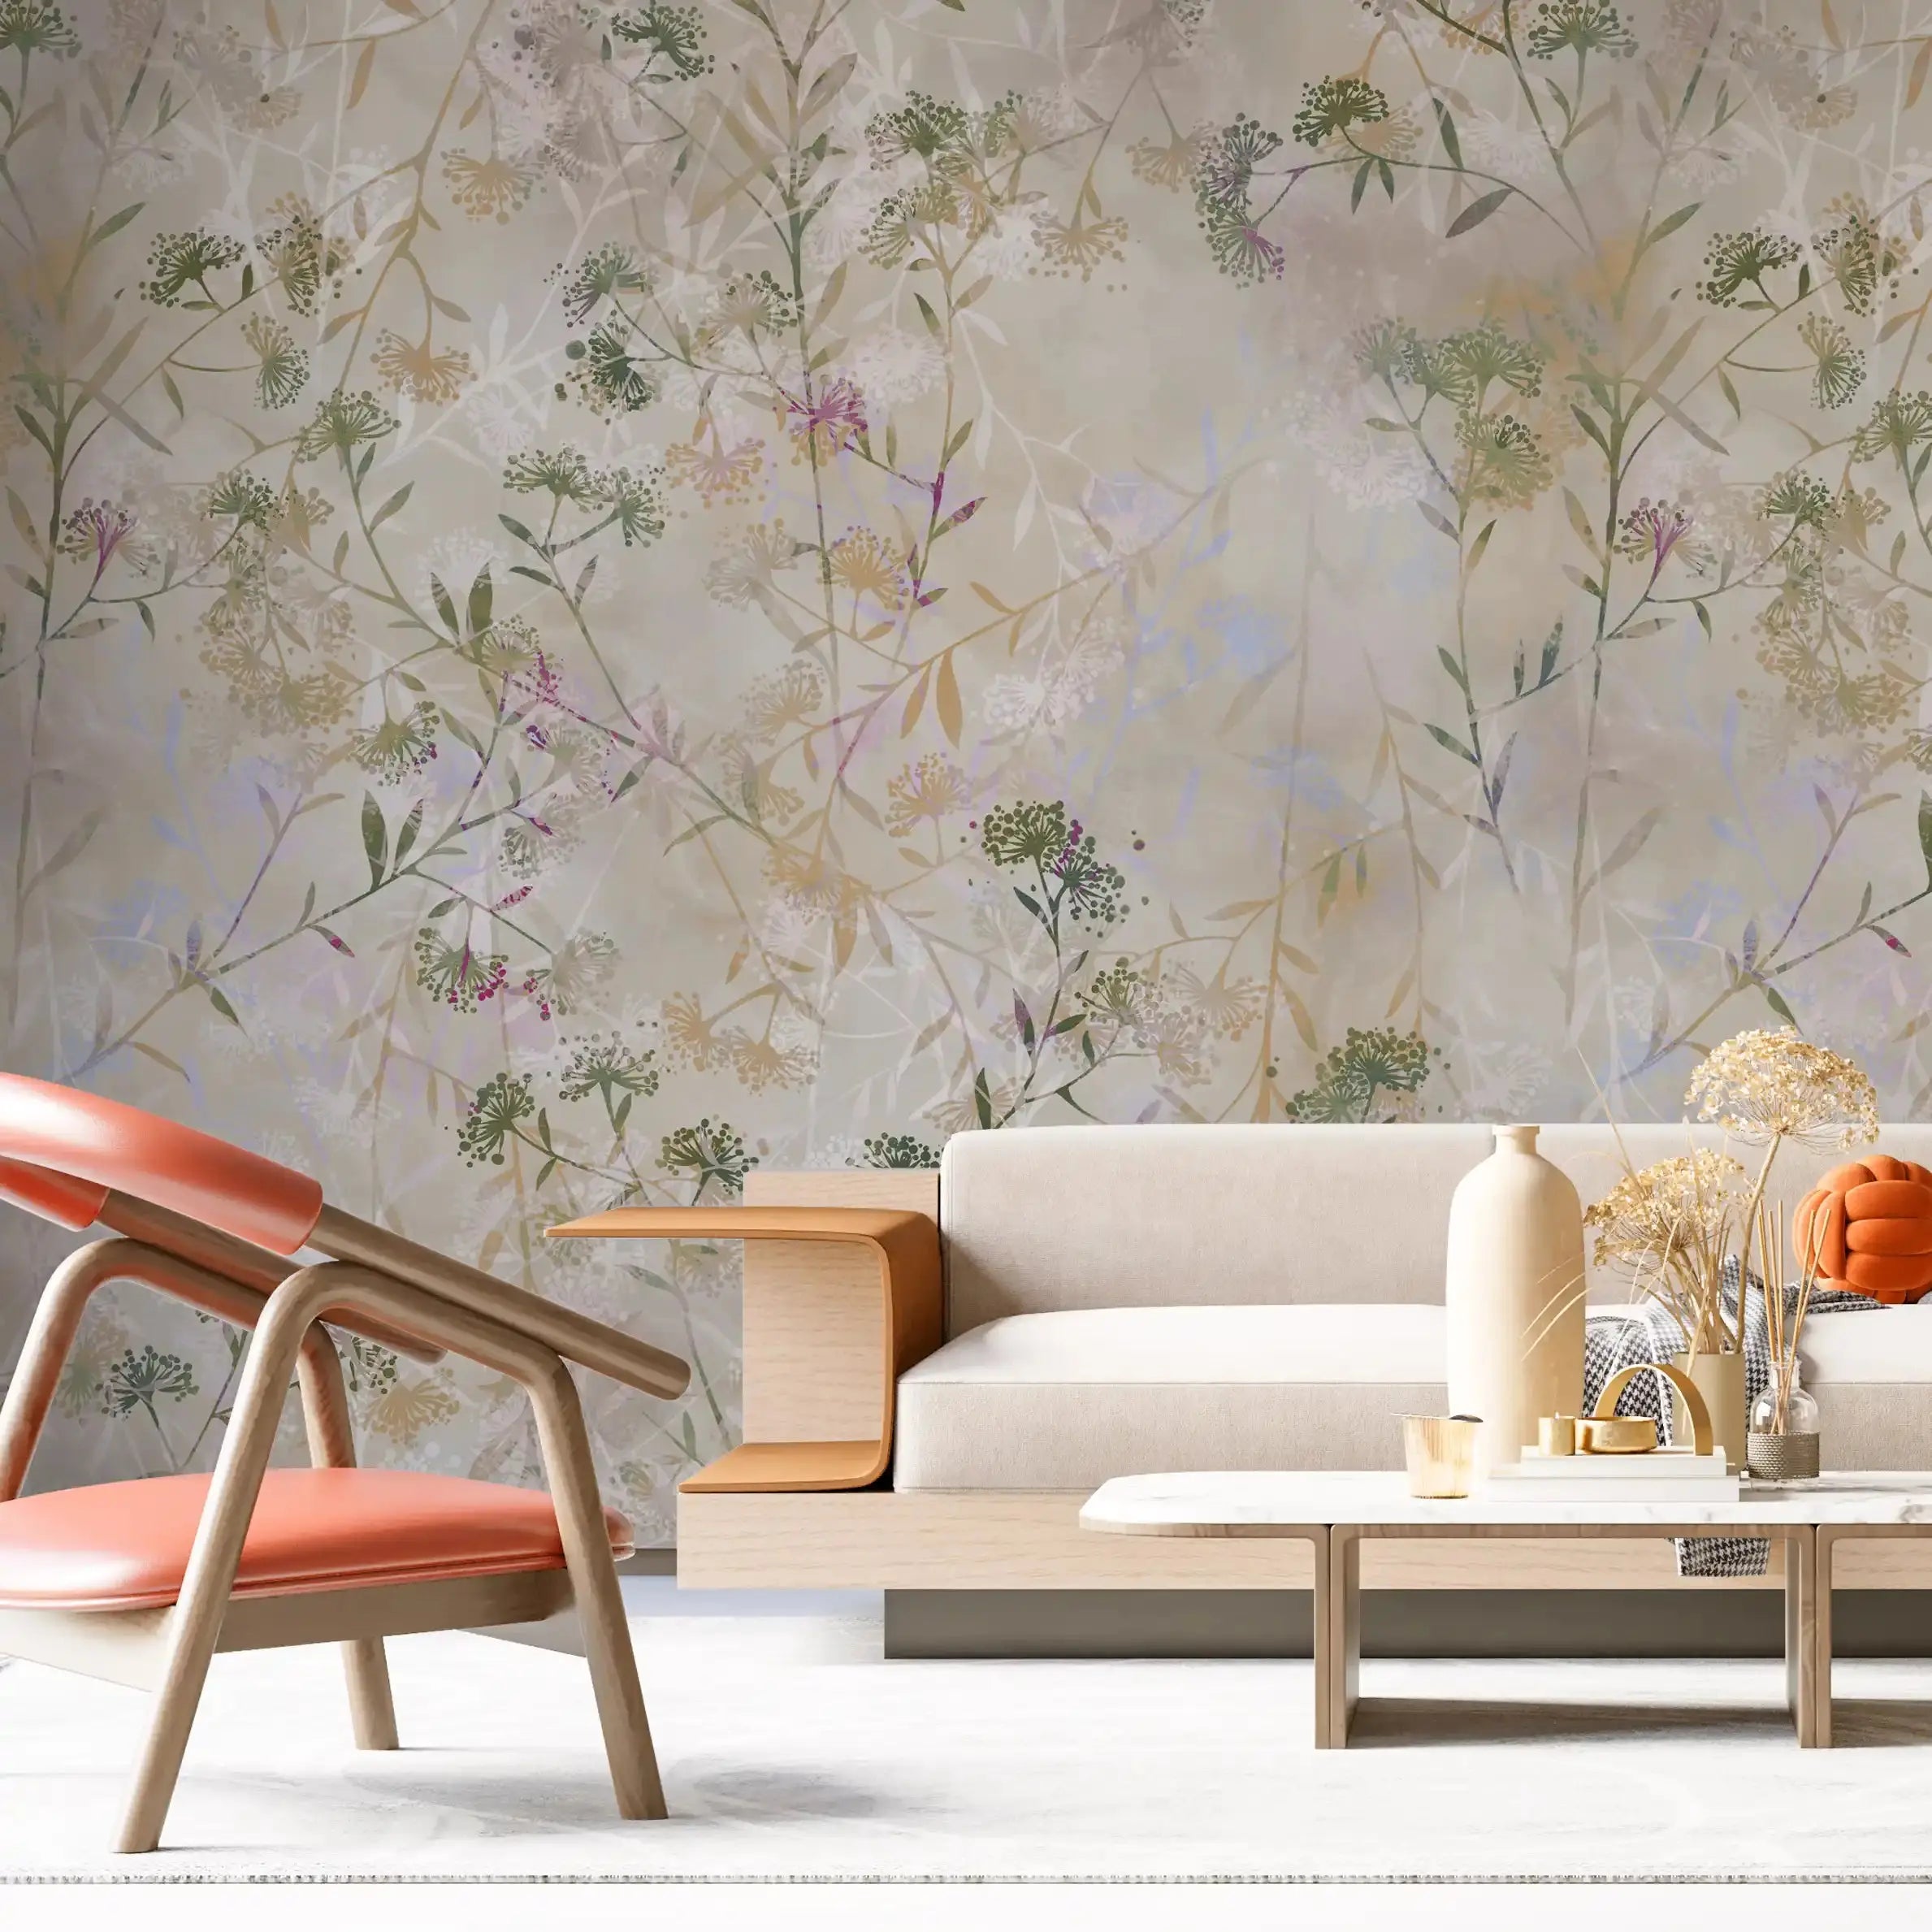 3009-A / Wild Floral Wall Mural - Beige Patterned Peel and Stick Wallpaper for Bedroom and Bathroom - Artevella